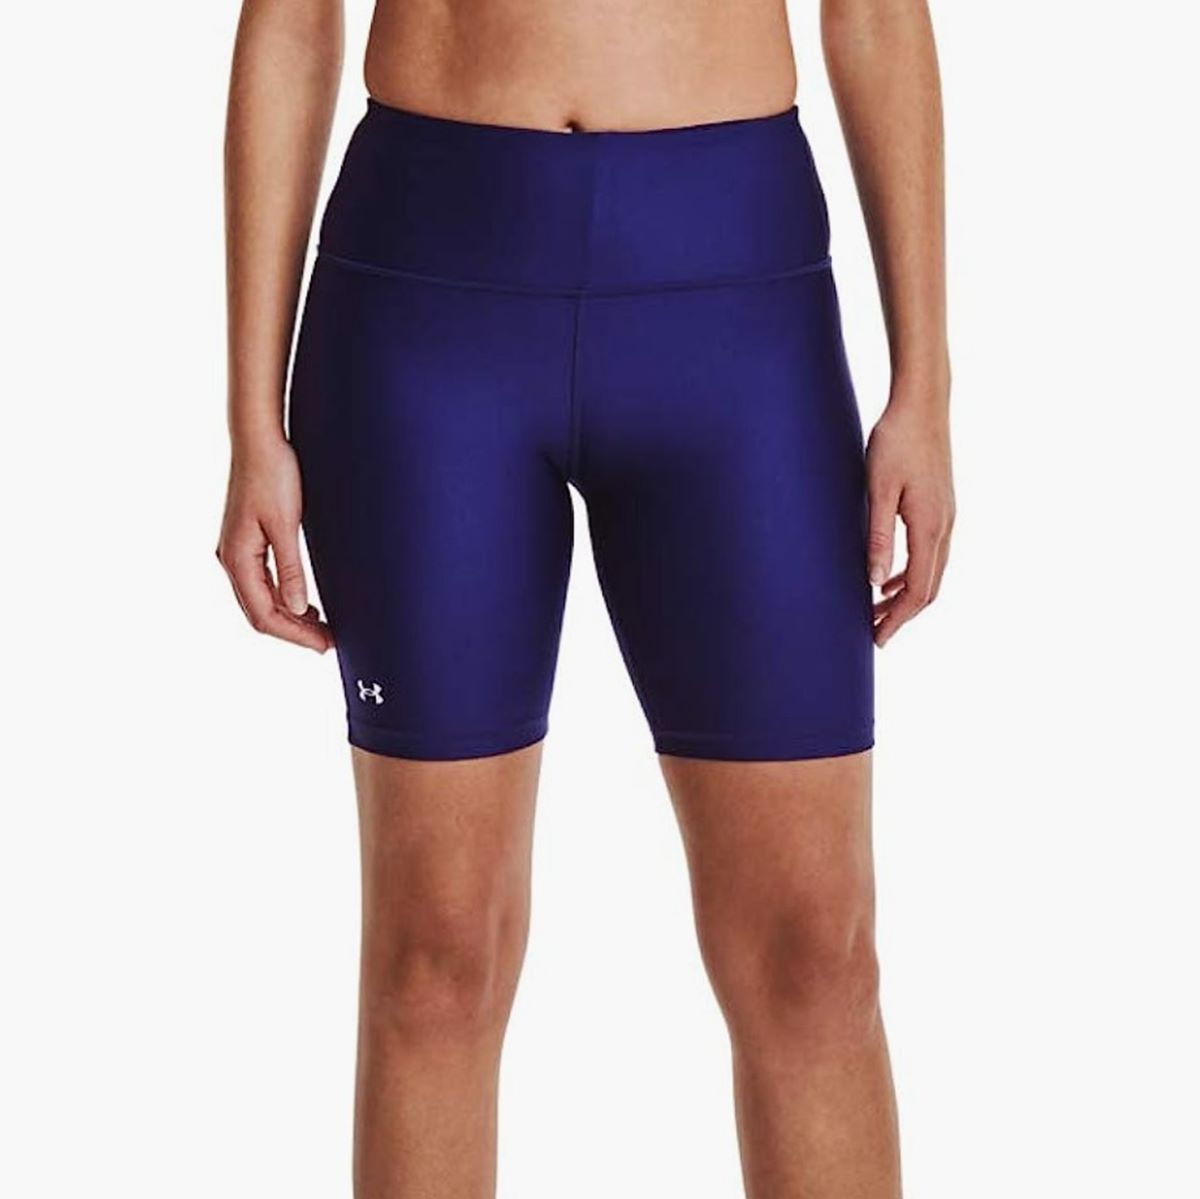 10 Best Women’S Compression Shorts For 2023